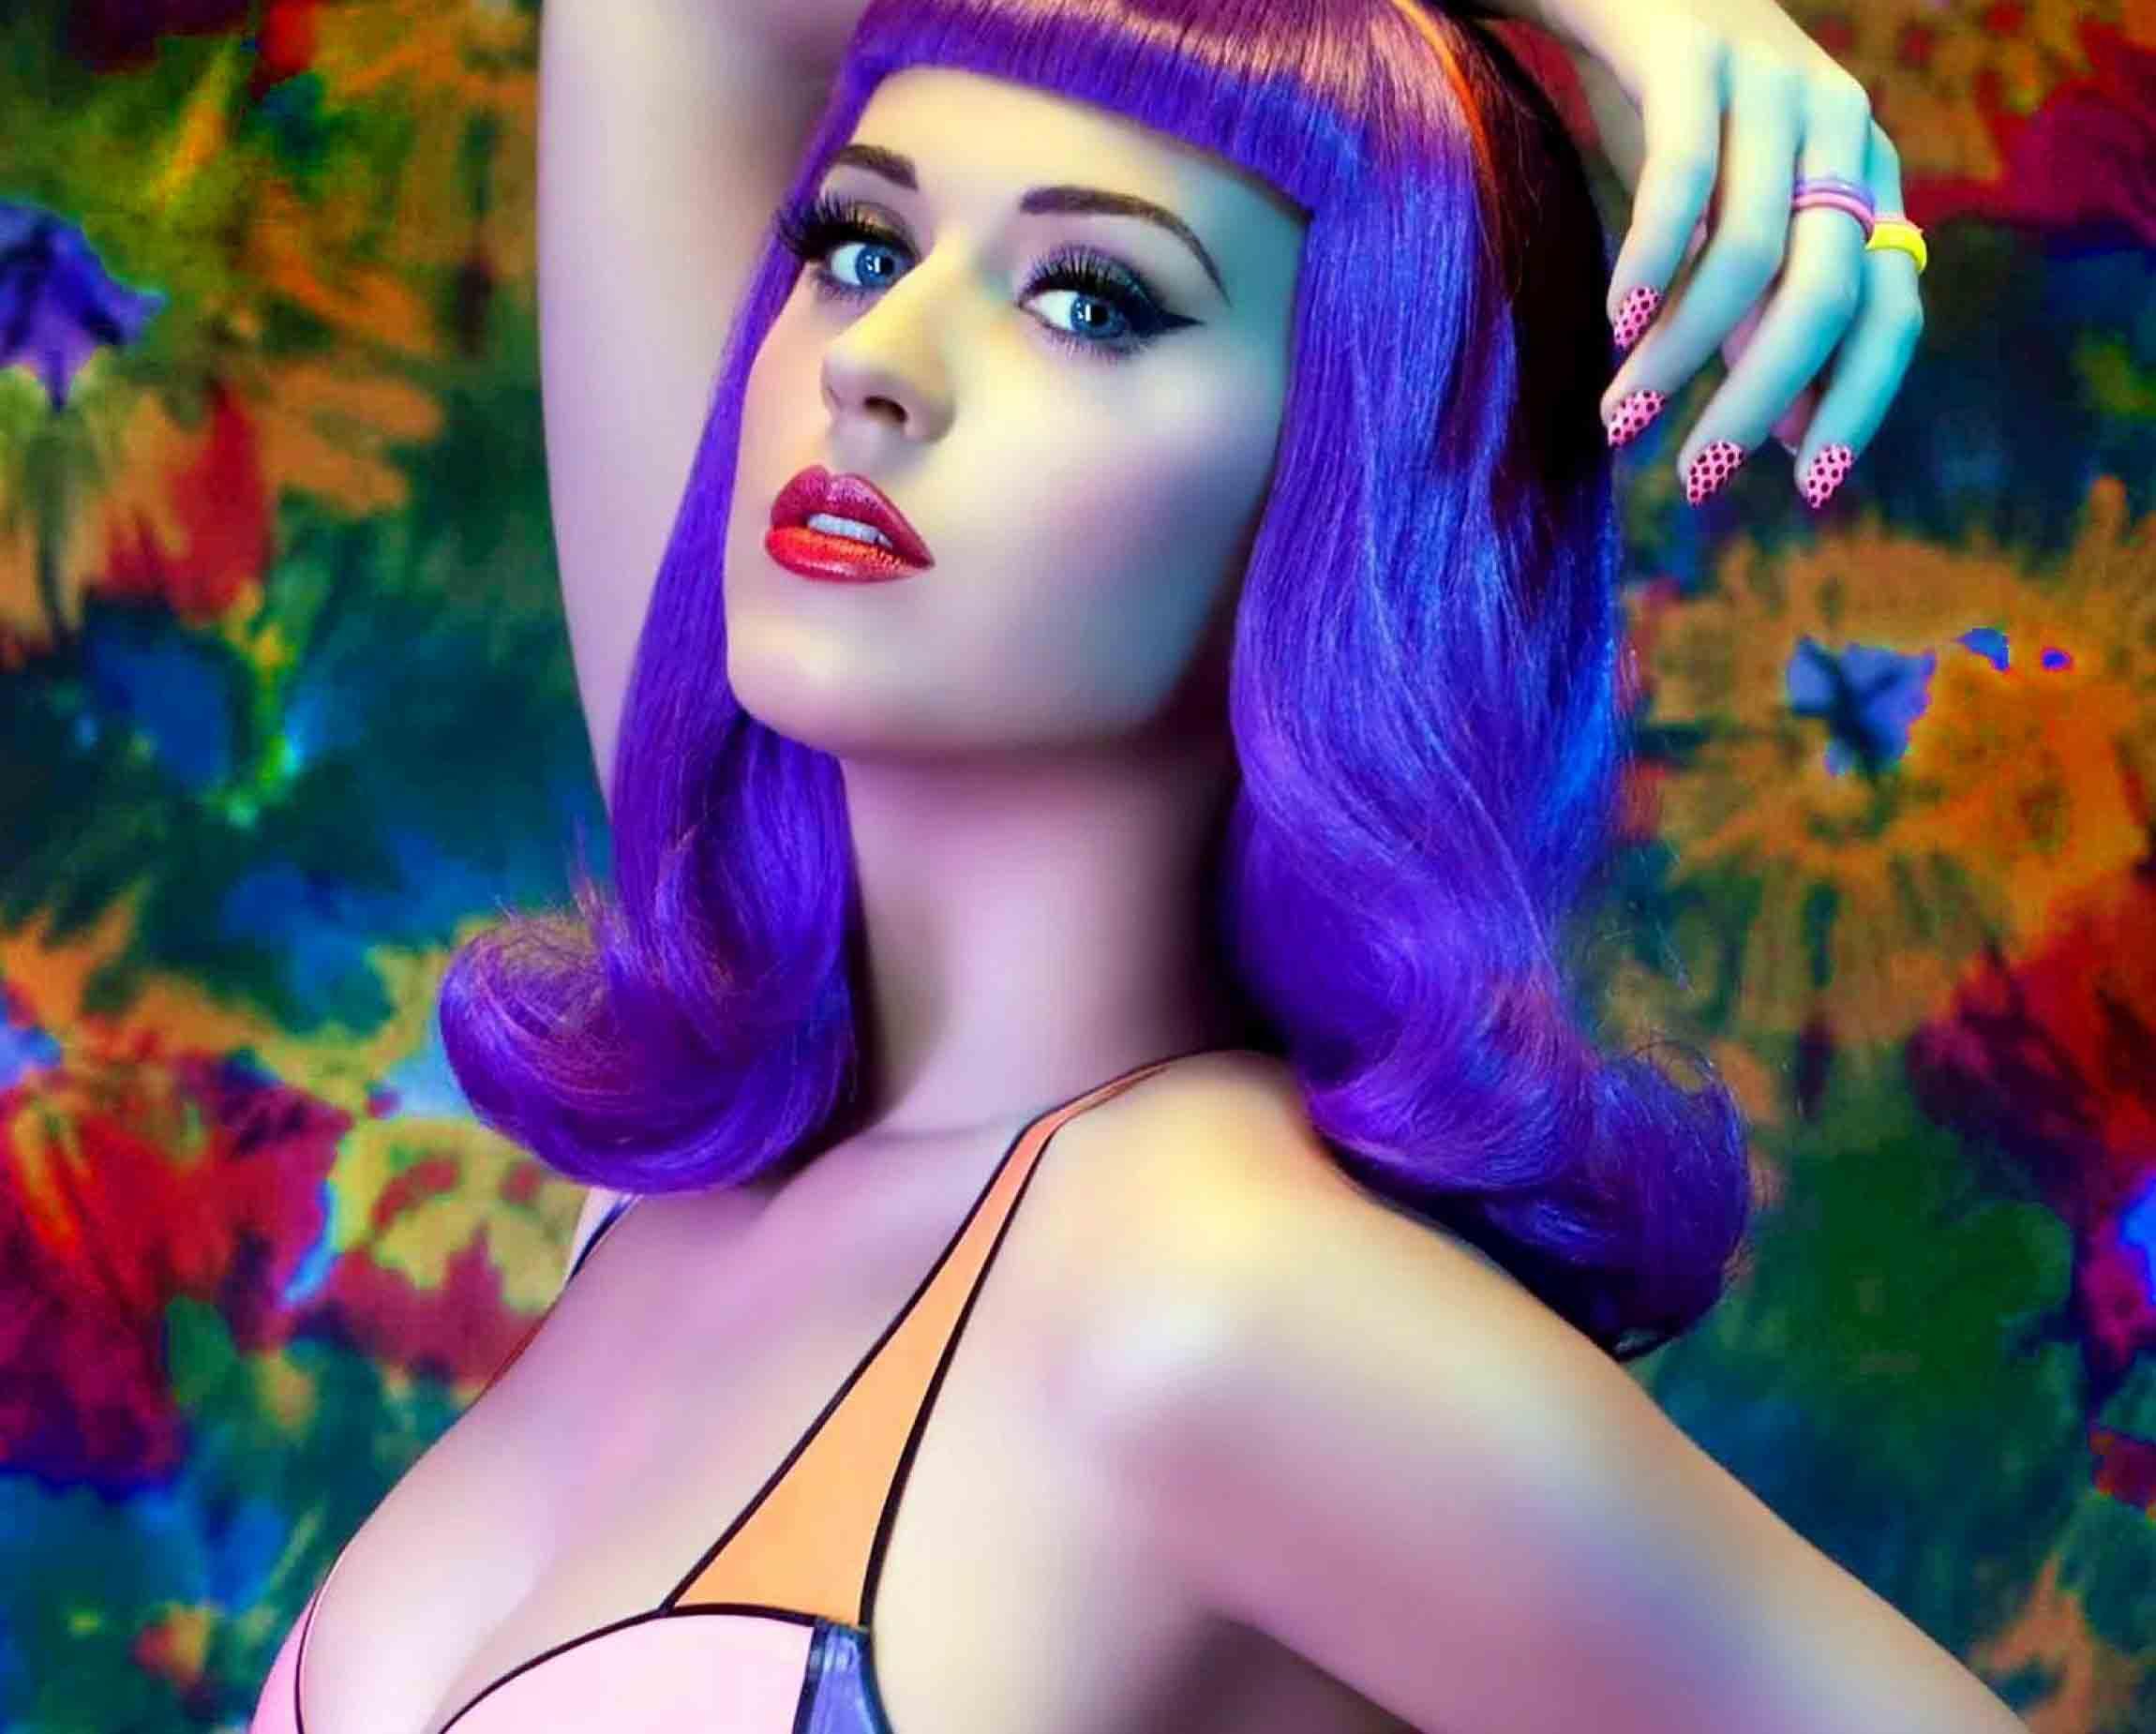 Katy Perry Wallpaper HD 2019 for Android